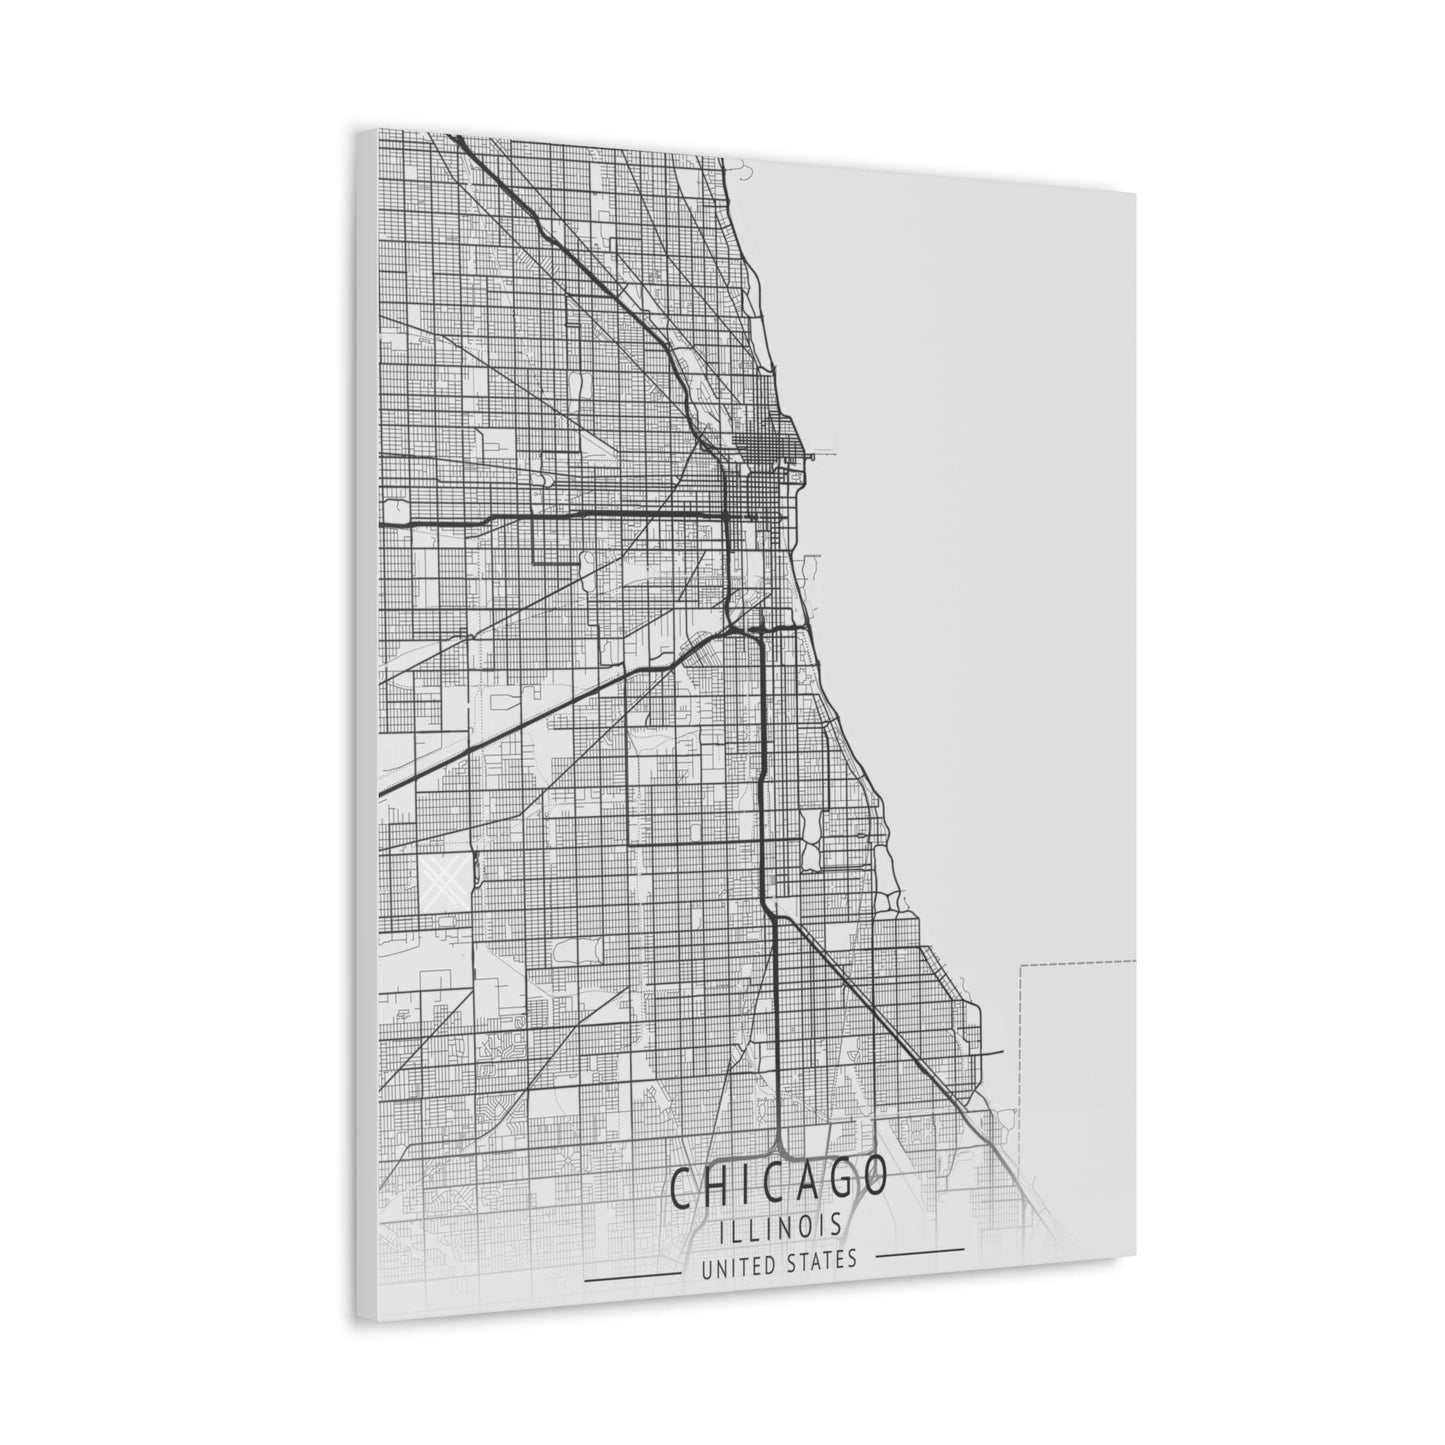 Stunning Large Vertical Chicago City Map: Perfect Wall Art for Your Home Decor